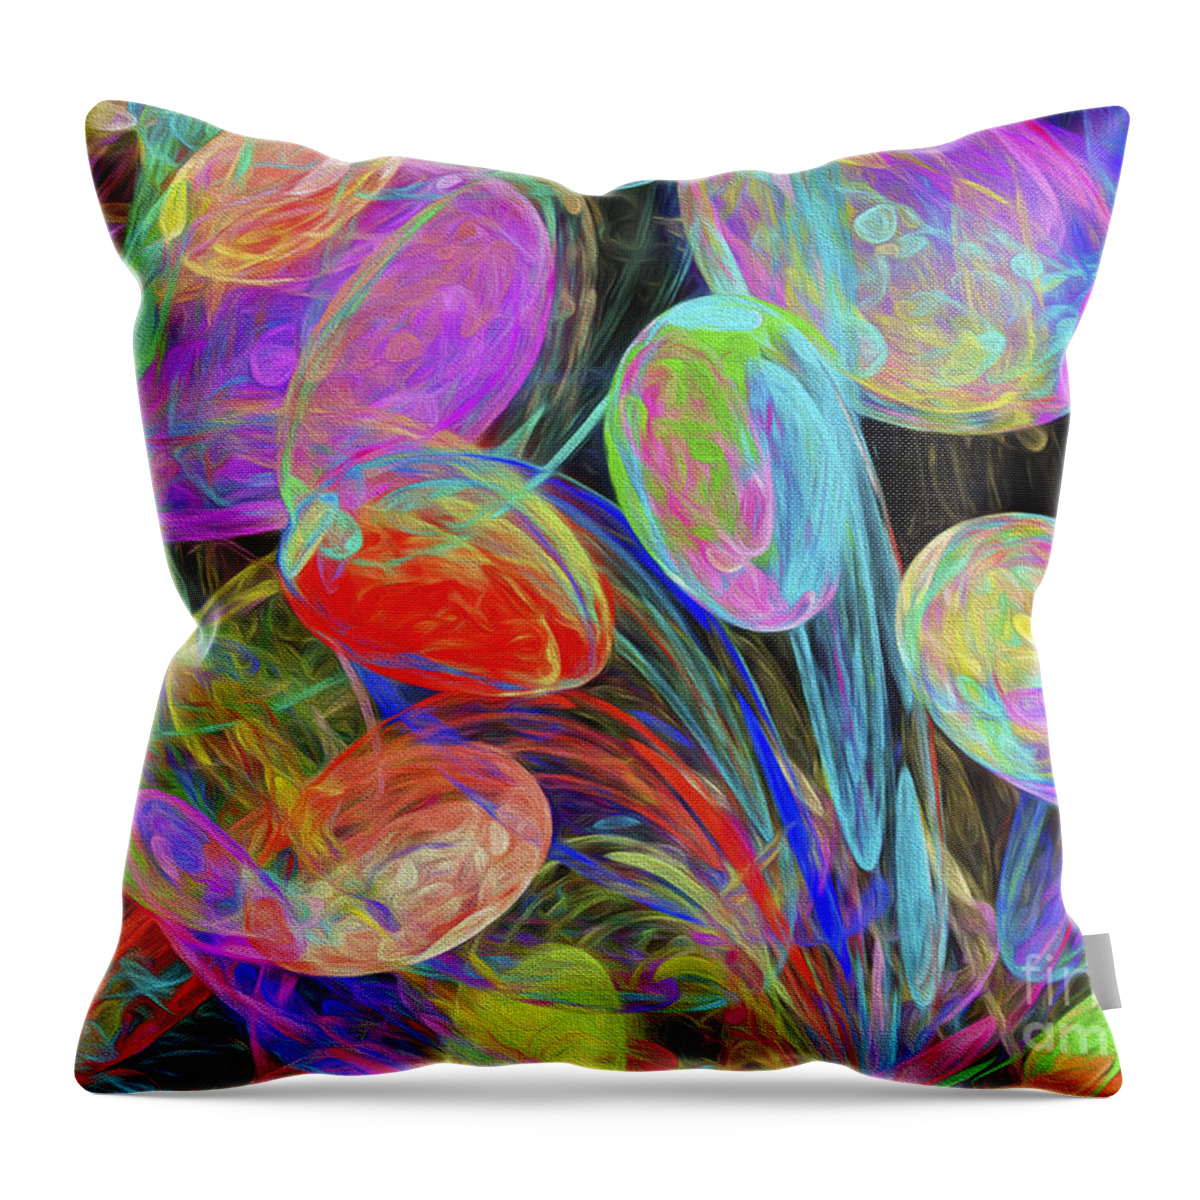 Andee Design Abstract Throw Pillow featuring the digital art Jelly Beans And Balloons Abstract by Andee Design